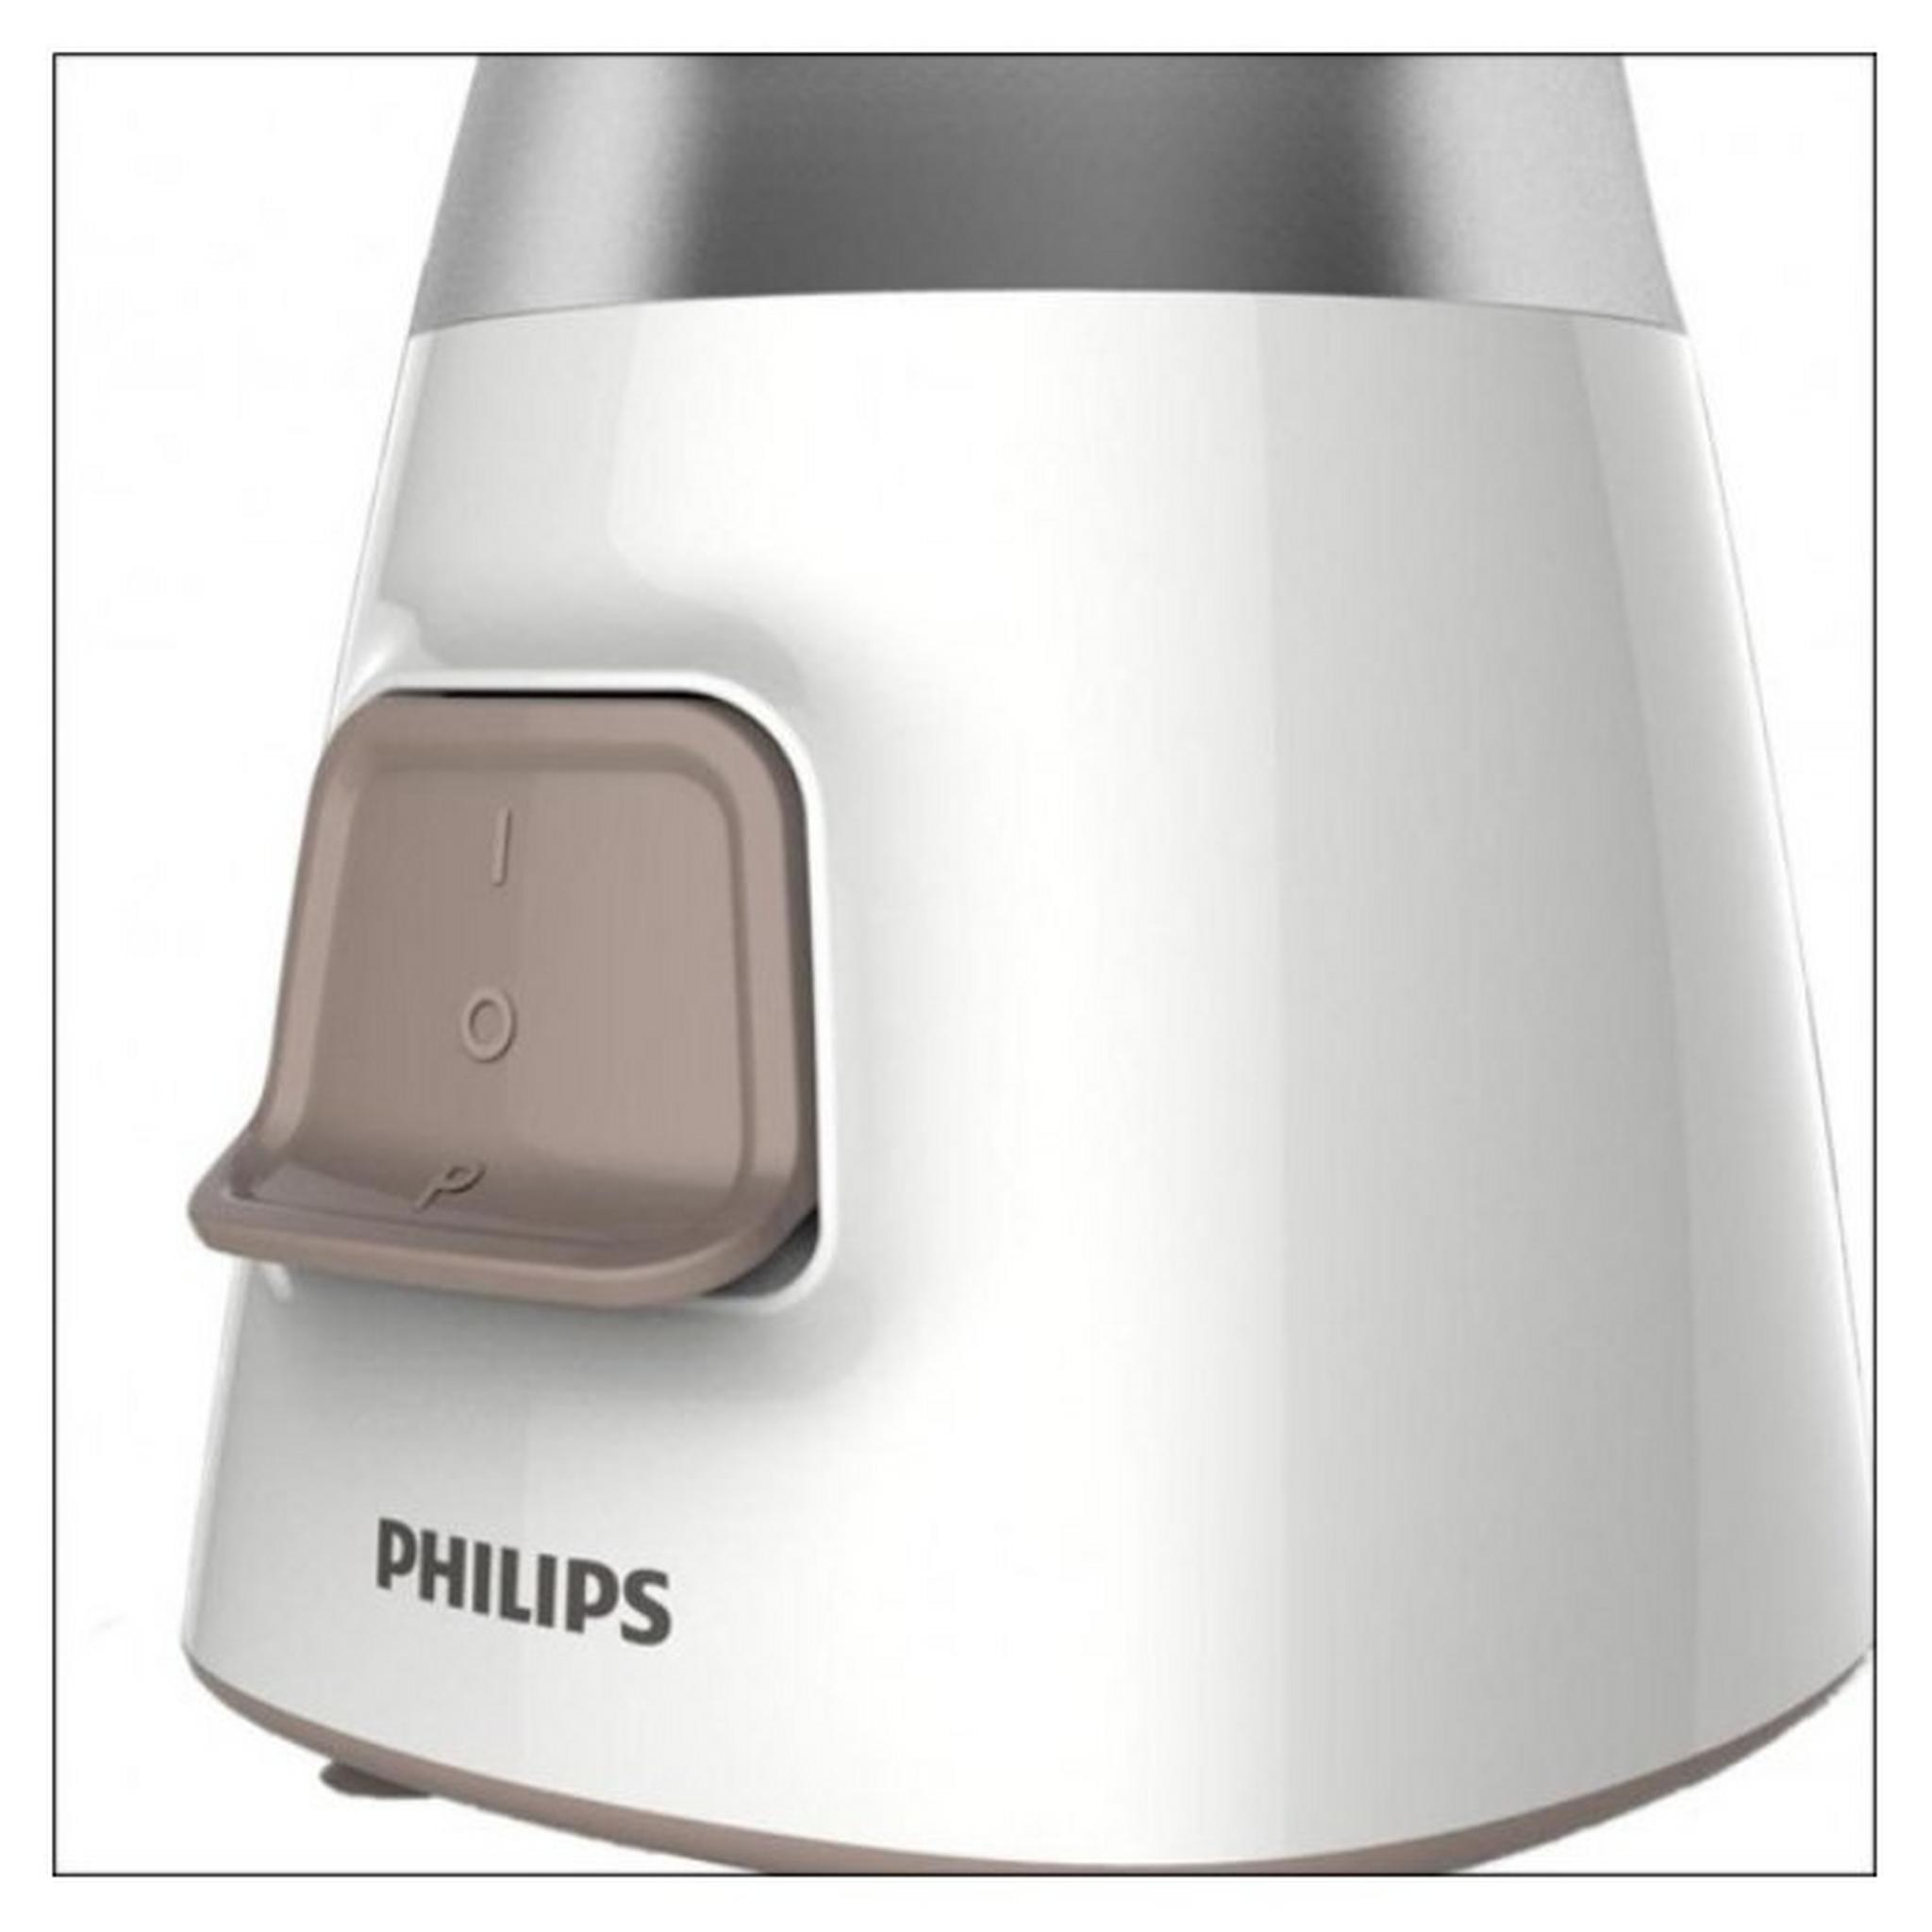 Philips 450W 1.25 L Daily Collection Blender (HR2056/01) - White